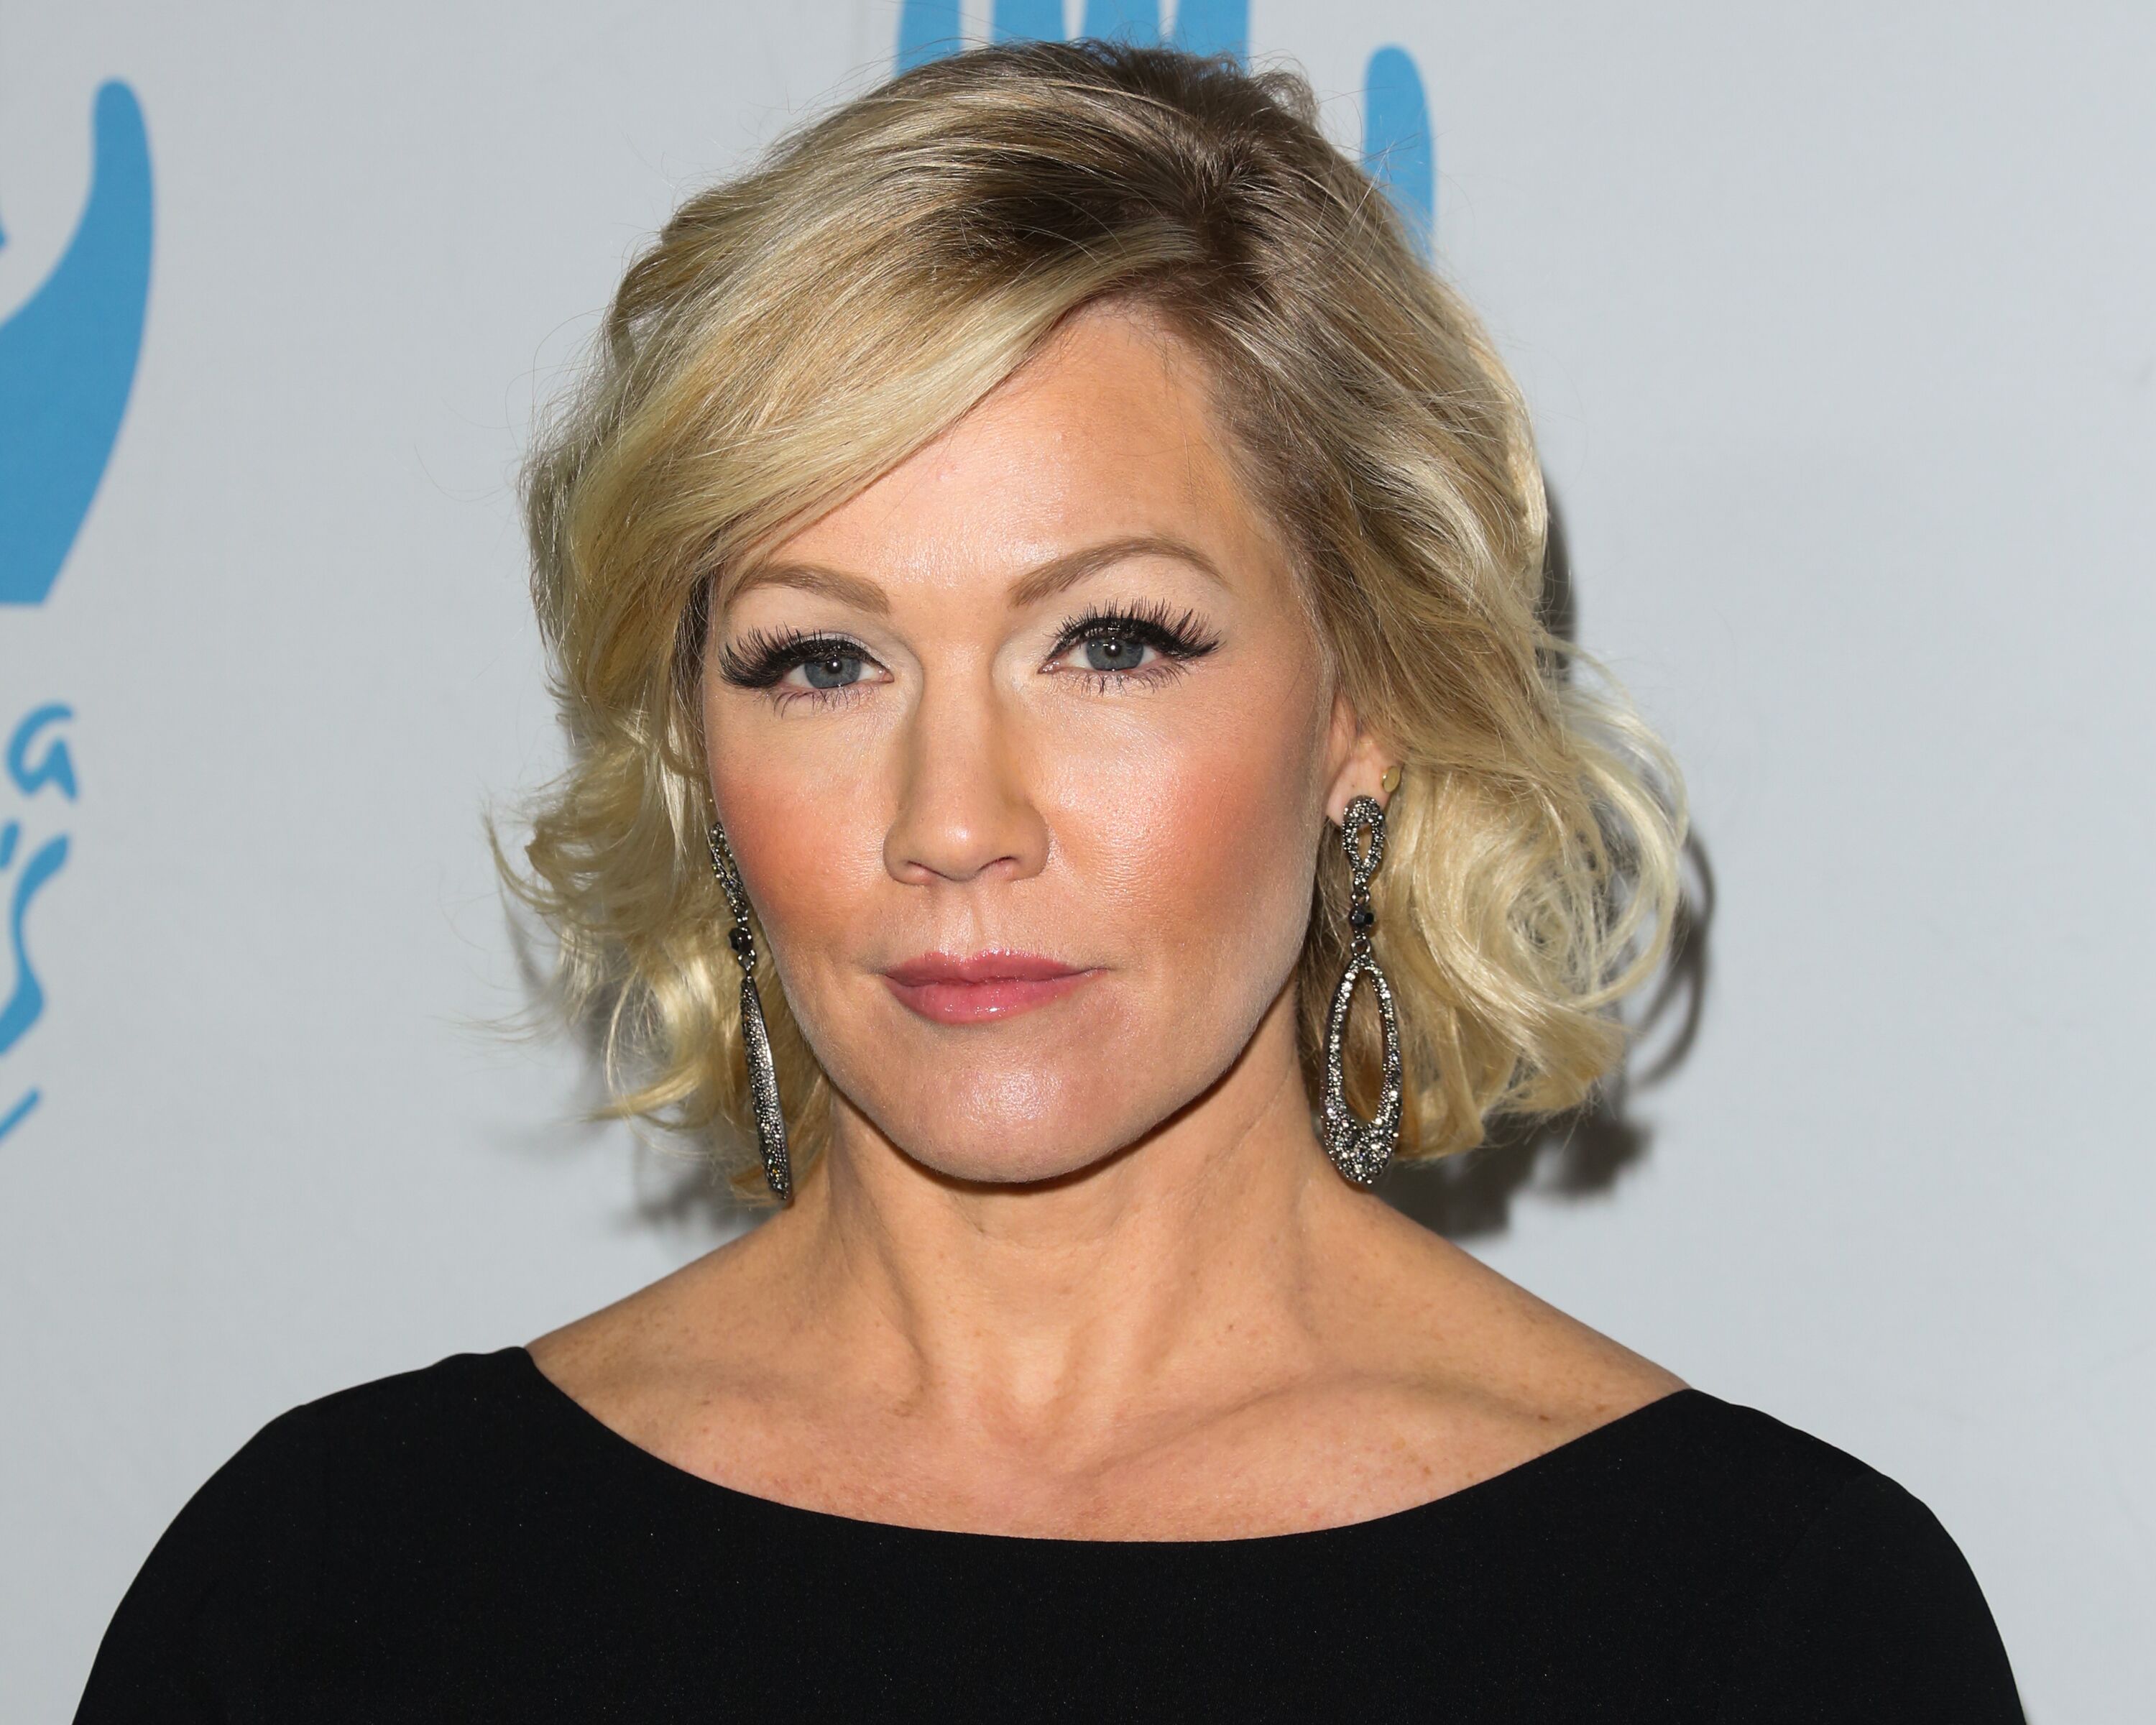 Jennie Garth attends the 2nd Annual Save A Child's Heart Gala. | Source: Getty Images